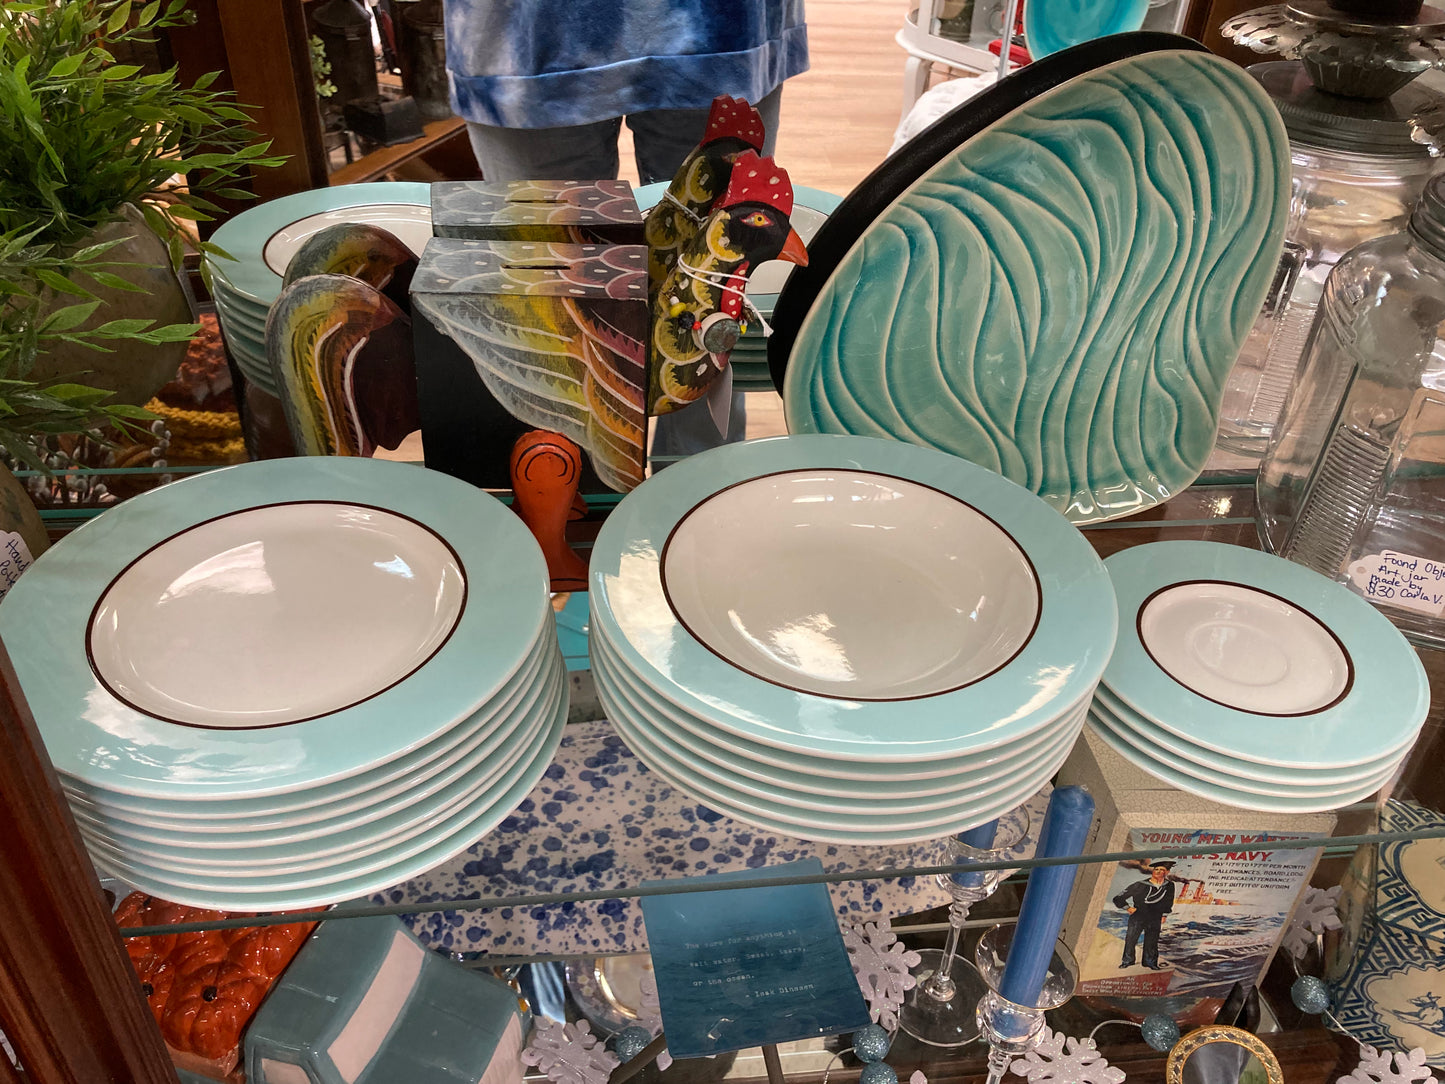 Pagnossin Ironstone AUDREY 8.5" Rim Soup Bowls, Robin's Egg Blue Brown Band, Made in Italy, Crate & Barrel $69.95 set of 8